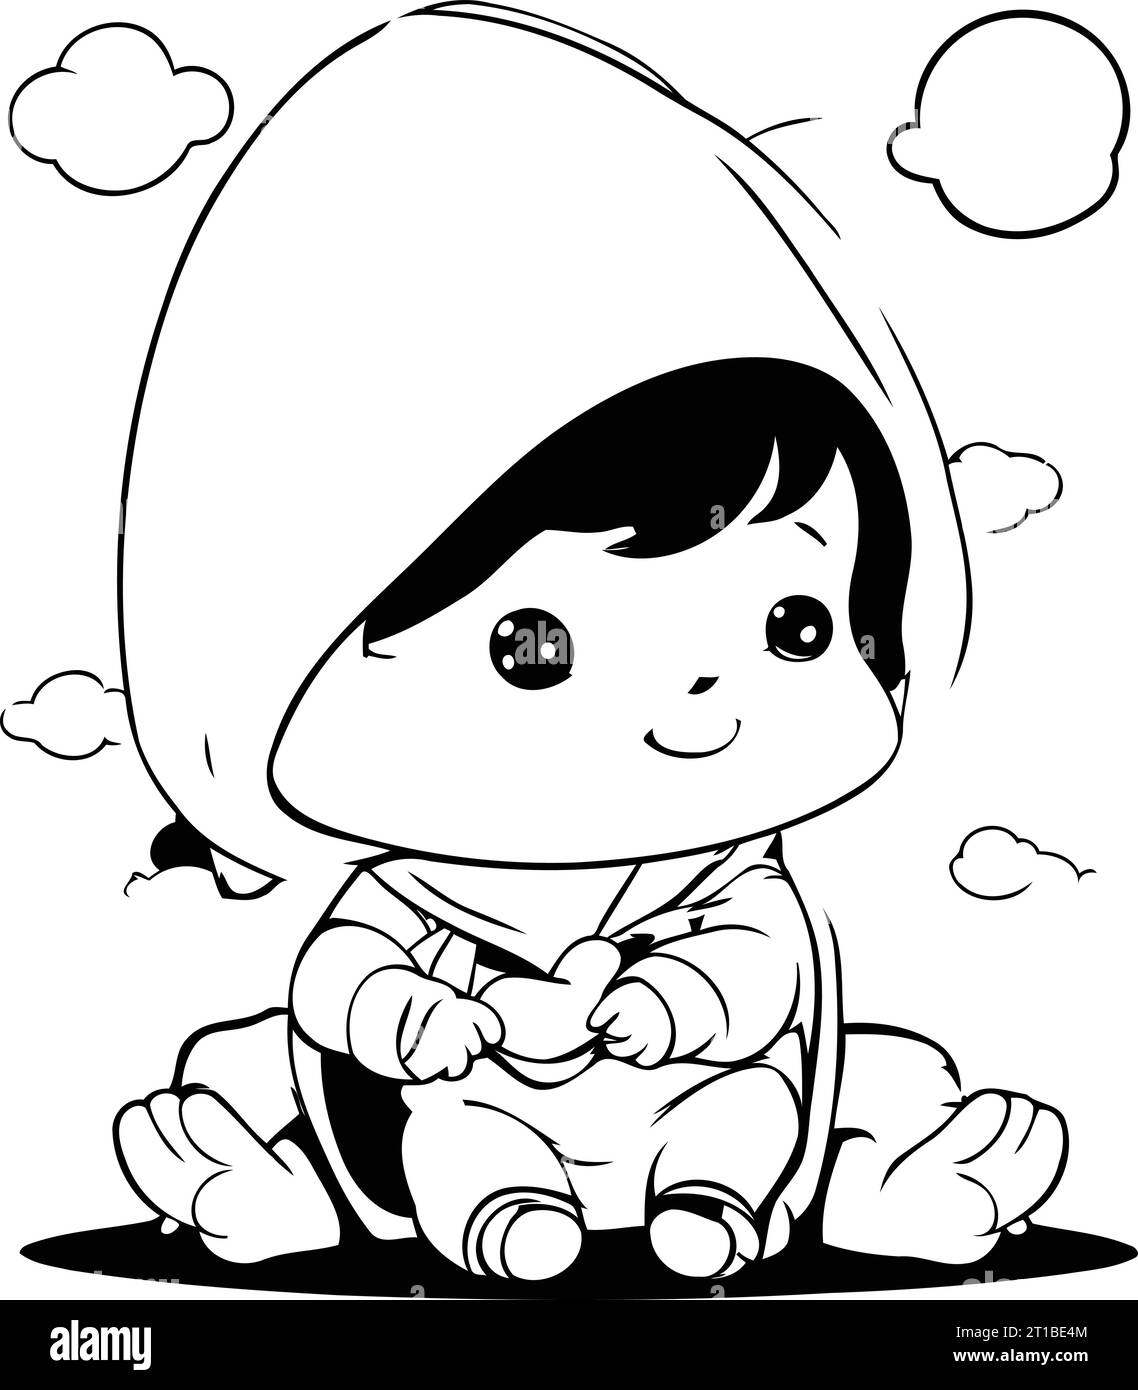 Black and White Cartoon Illustration of Cute Baby Boy or Kid Wearing Hoodie Sitting and Smiling for Coloring Book Stock Vector